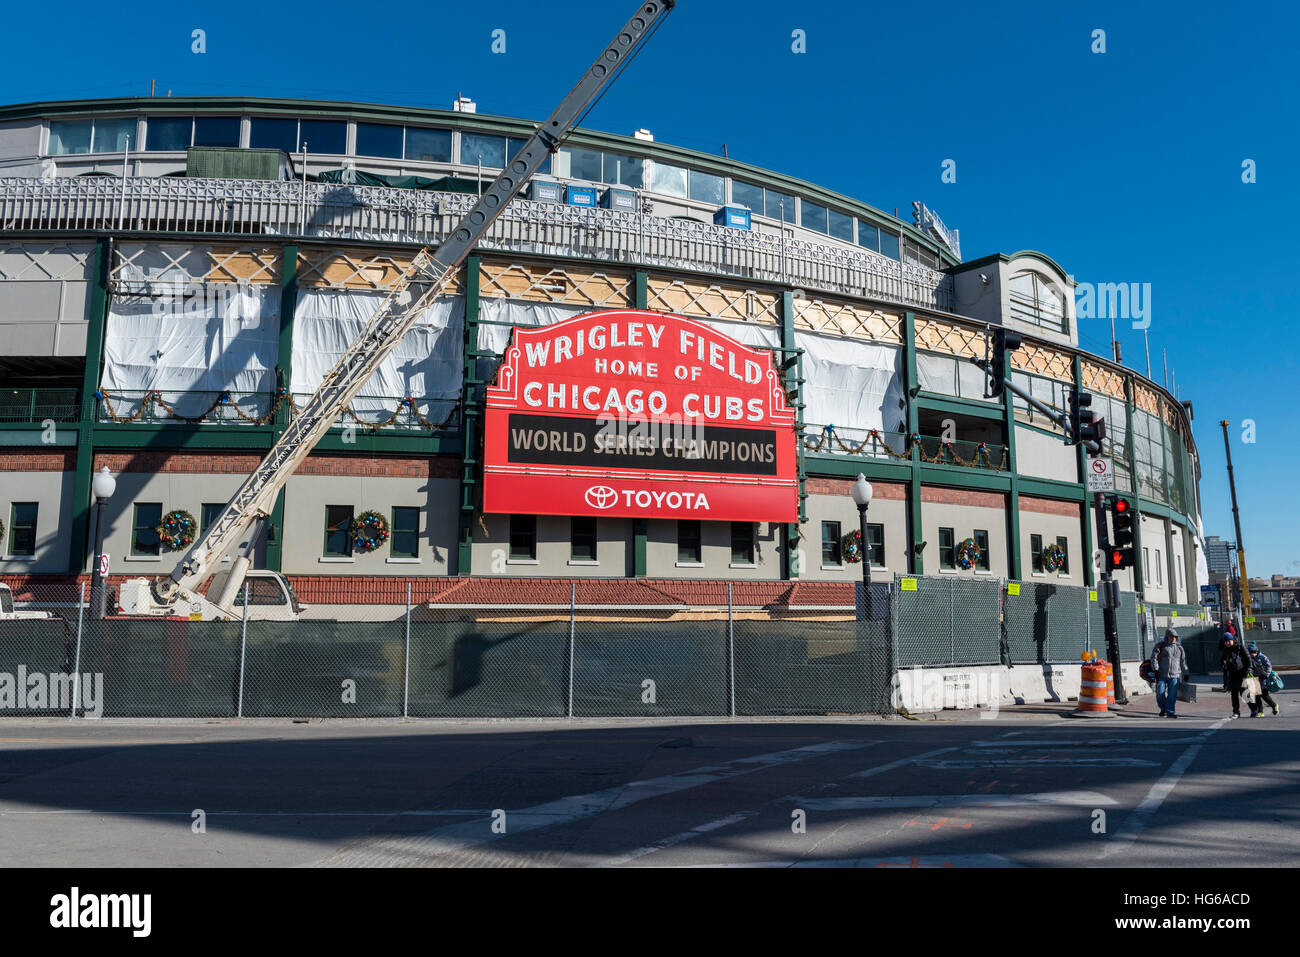 Chicago, USA. 4th Jan, 2017. Wrigley Field, the home of baseball's Chicago Cubs, and current World Series Champions, is seen undergoing refurbishment and reconstruction. Works include construction of The Hotel Zachary as well as a new retail/entertainment complex at Addison & Clark. © Stephen Chung/Alamy Live News Stock Photo